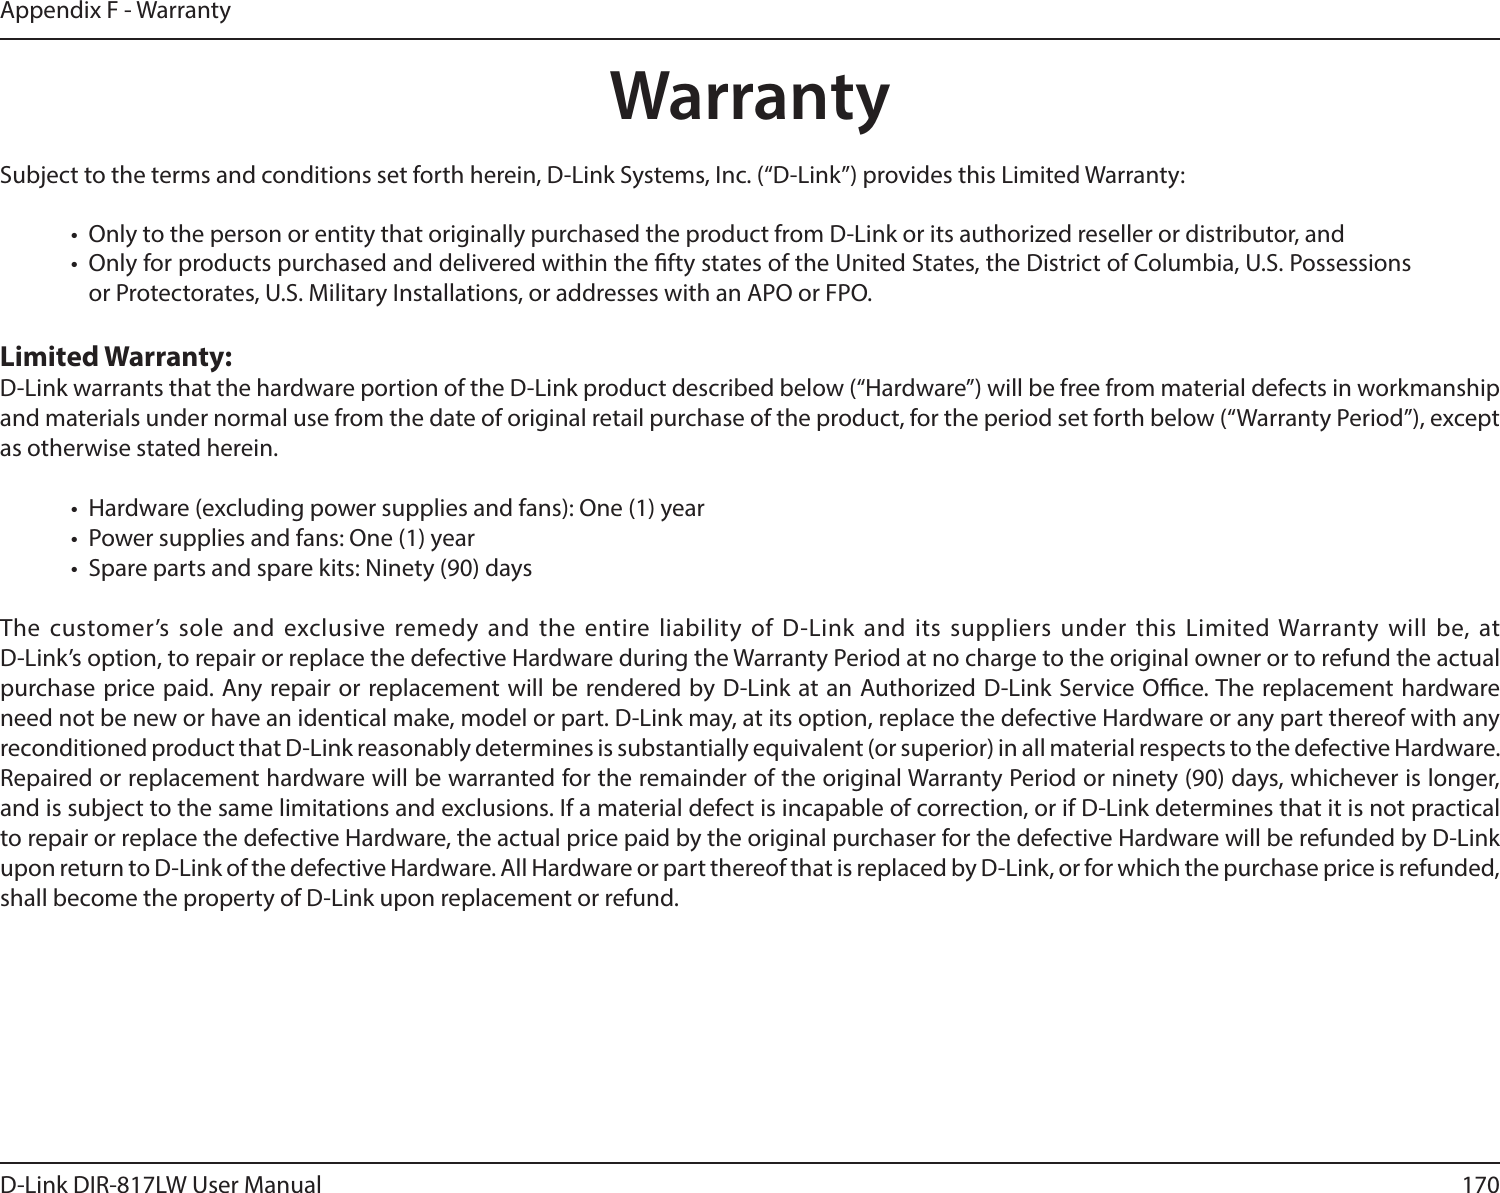 170D-Link DIR-817LW User ManualAppendix F - WarrantyWarrantySubject to the terms and conditions set forth herein, D-Link Systems, Inc. (“D-Link”) provides this Limited Warranty:•  Only to the person or entity that originally purchased the product from D-Link or its authorized reseller or distributor, and•  Only for products purchased and delivered within the fty states of the United States, the District of Columbia, U.S. Possessions or Protectorates, U.S. Military Installations, or addresses with an APO or FPO.Limited Warranty:D-Link warrants that the hardware portion of the D-Link product described below (“Hardware”) will be free from material defects in workmanship and materials under normal use from the date of original retail purchase of the product, for the period set forth below (“Warranty Period”), except as otherwise stated herein.•  Hardware (excluding power supplies and fans): One (1) year•  Power supplies and fans: One (1) year•  Spare parts and spare kits: Ninety (90) daysThe customer’s sole  and exclusive  remedy and the entire liability of  D-Link  and its suppliers  under this  Limited Warranty will be, at  D-Link’s option, to repair or replace the defective Hardware during the Warranty Period at no charge to the original owner or to refund the actual purchase price paid. Any repair or replacement will be rendered by D-Link at an Authorized D-Link Service Oce. The replacement hardware need not be new or have an identical make, model or part. D-Link may, at its option, replace the defective Hardware or any part thereof with any reconditioned product that D-Link reasonably determines is substantially equivalent (or superior) in all material respects to the defective Hardware. Repaired or replacement hardware will be warranted for the remainder of the original Warranty Period or ninety (90) days, whichever is longer, and is subject to the same limitations and exclusions. If a material defect is incapable of correction, or if D-Link determines that it is not practical to repair or replace the defective Hardware, the actual price paid by the original purchaser for the defective Hardware will be refunded by D-Link upon return to D-Link of the defective Hardware. All Hardware or part thereof that is replaced by D-Link, or for which the purchase price is refunded, shall become the property of D-Link upon replacement or refund.